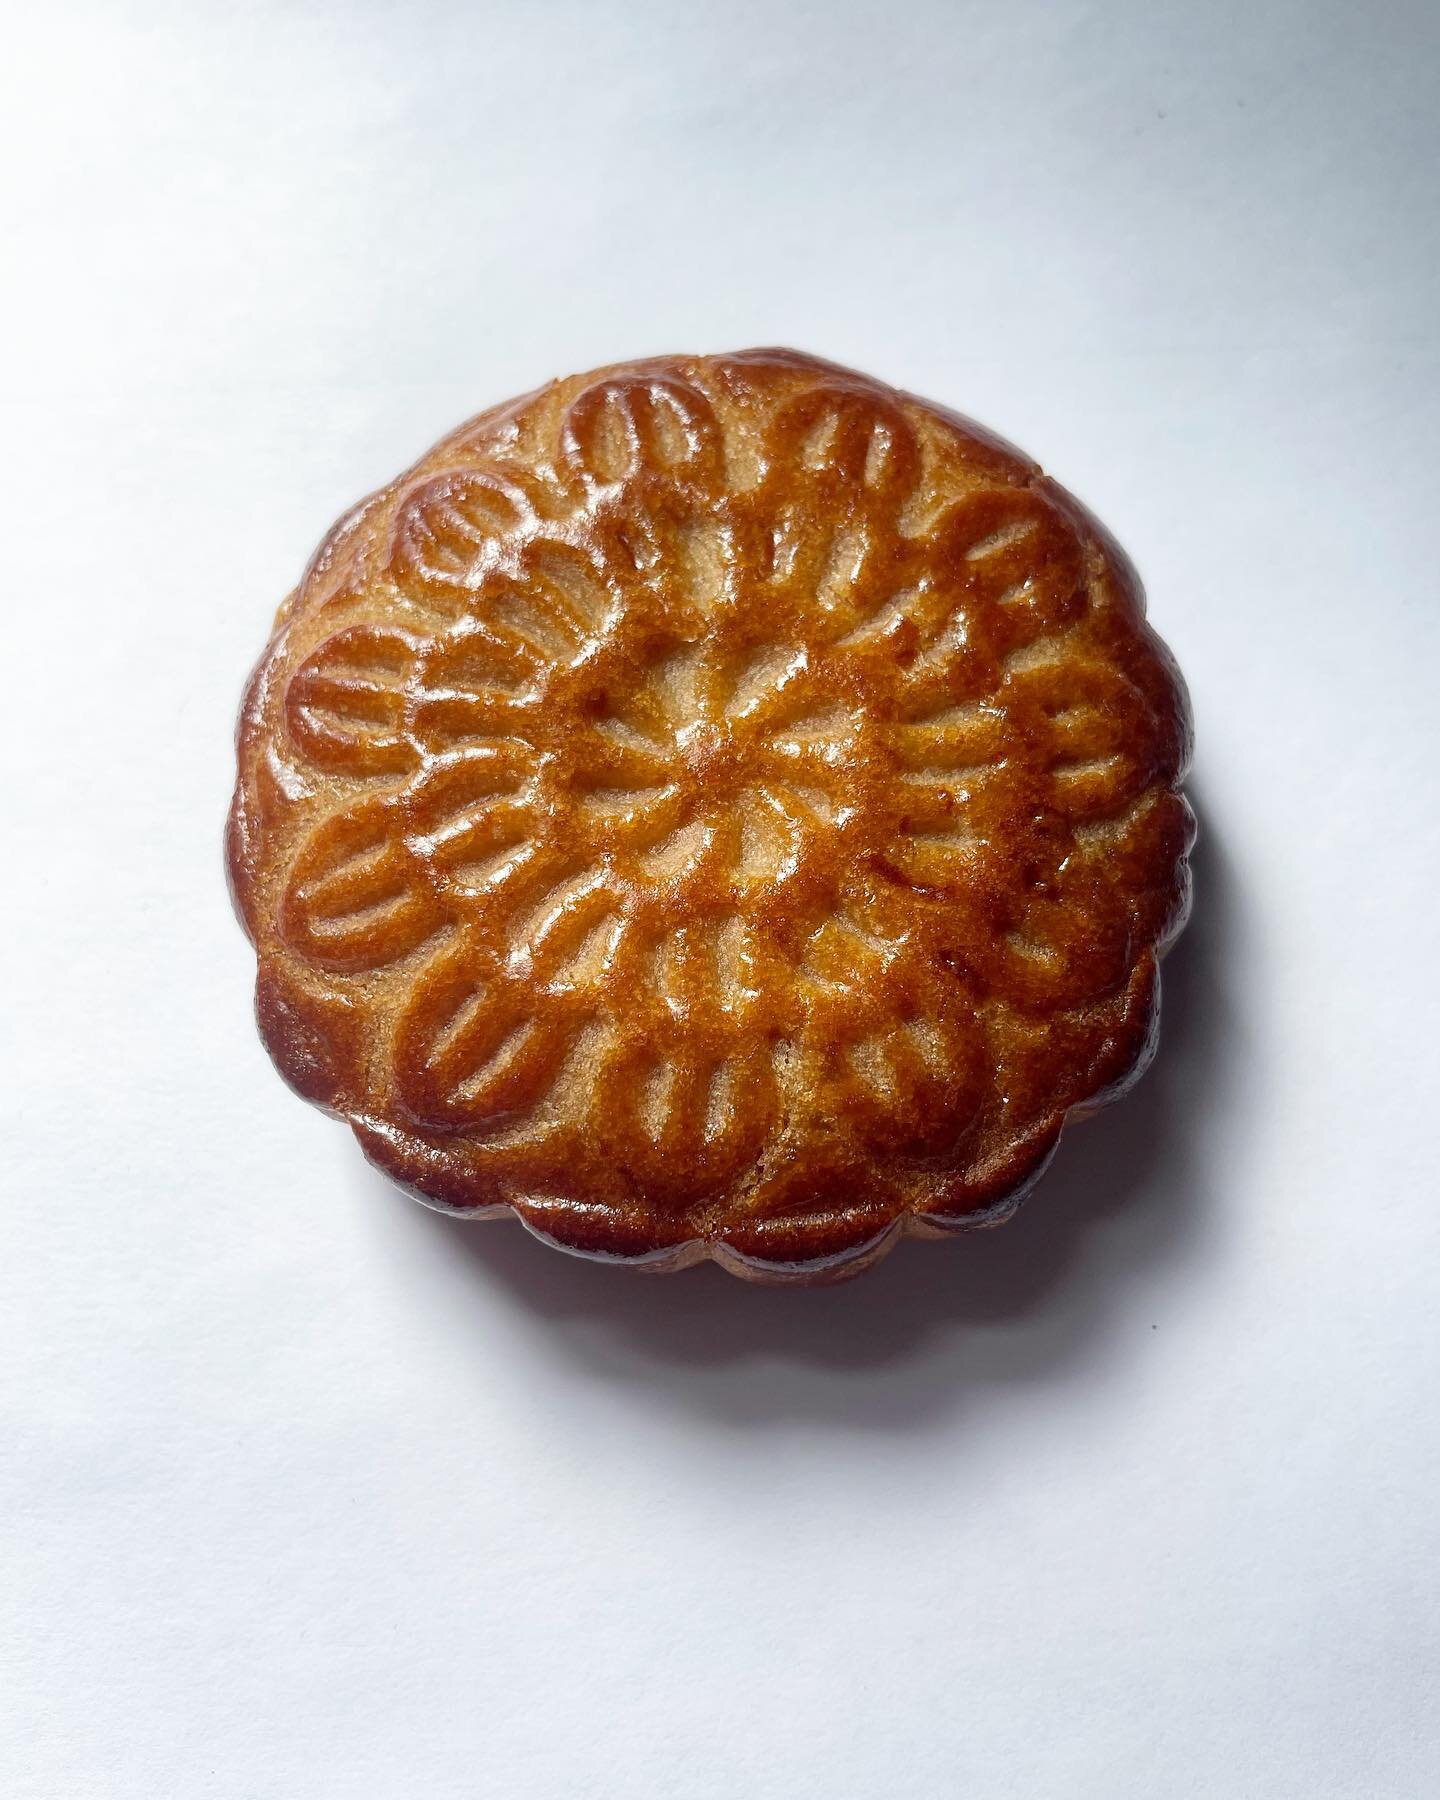 coming soon&hellip;.

🥮 mooncakes for #midautumnfestival, starting September 9th.